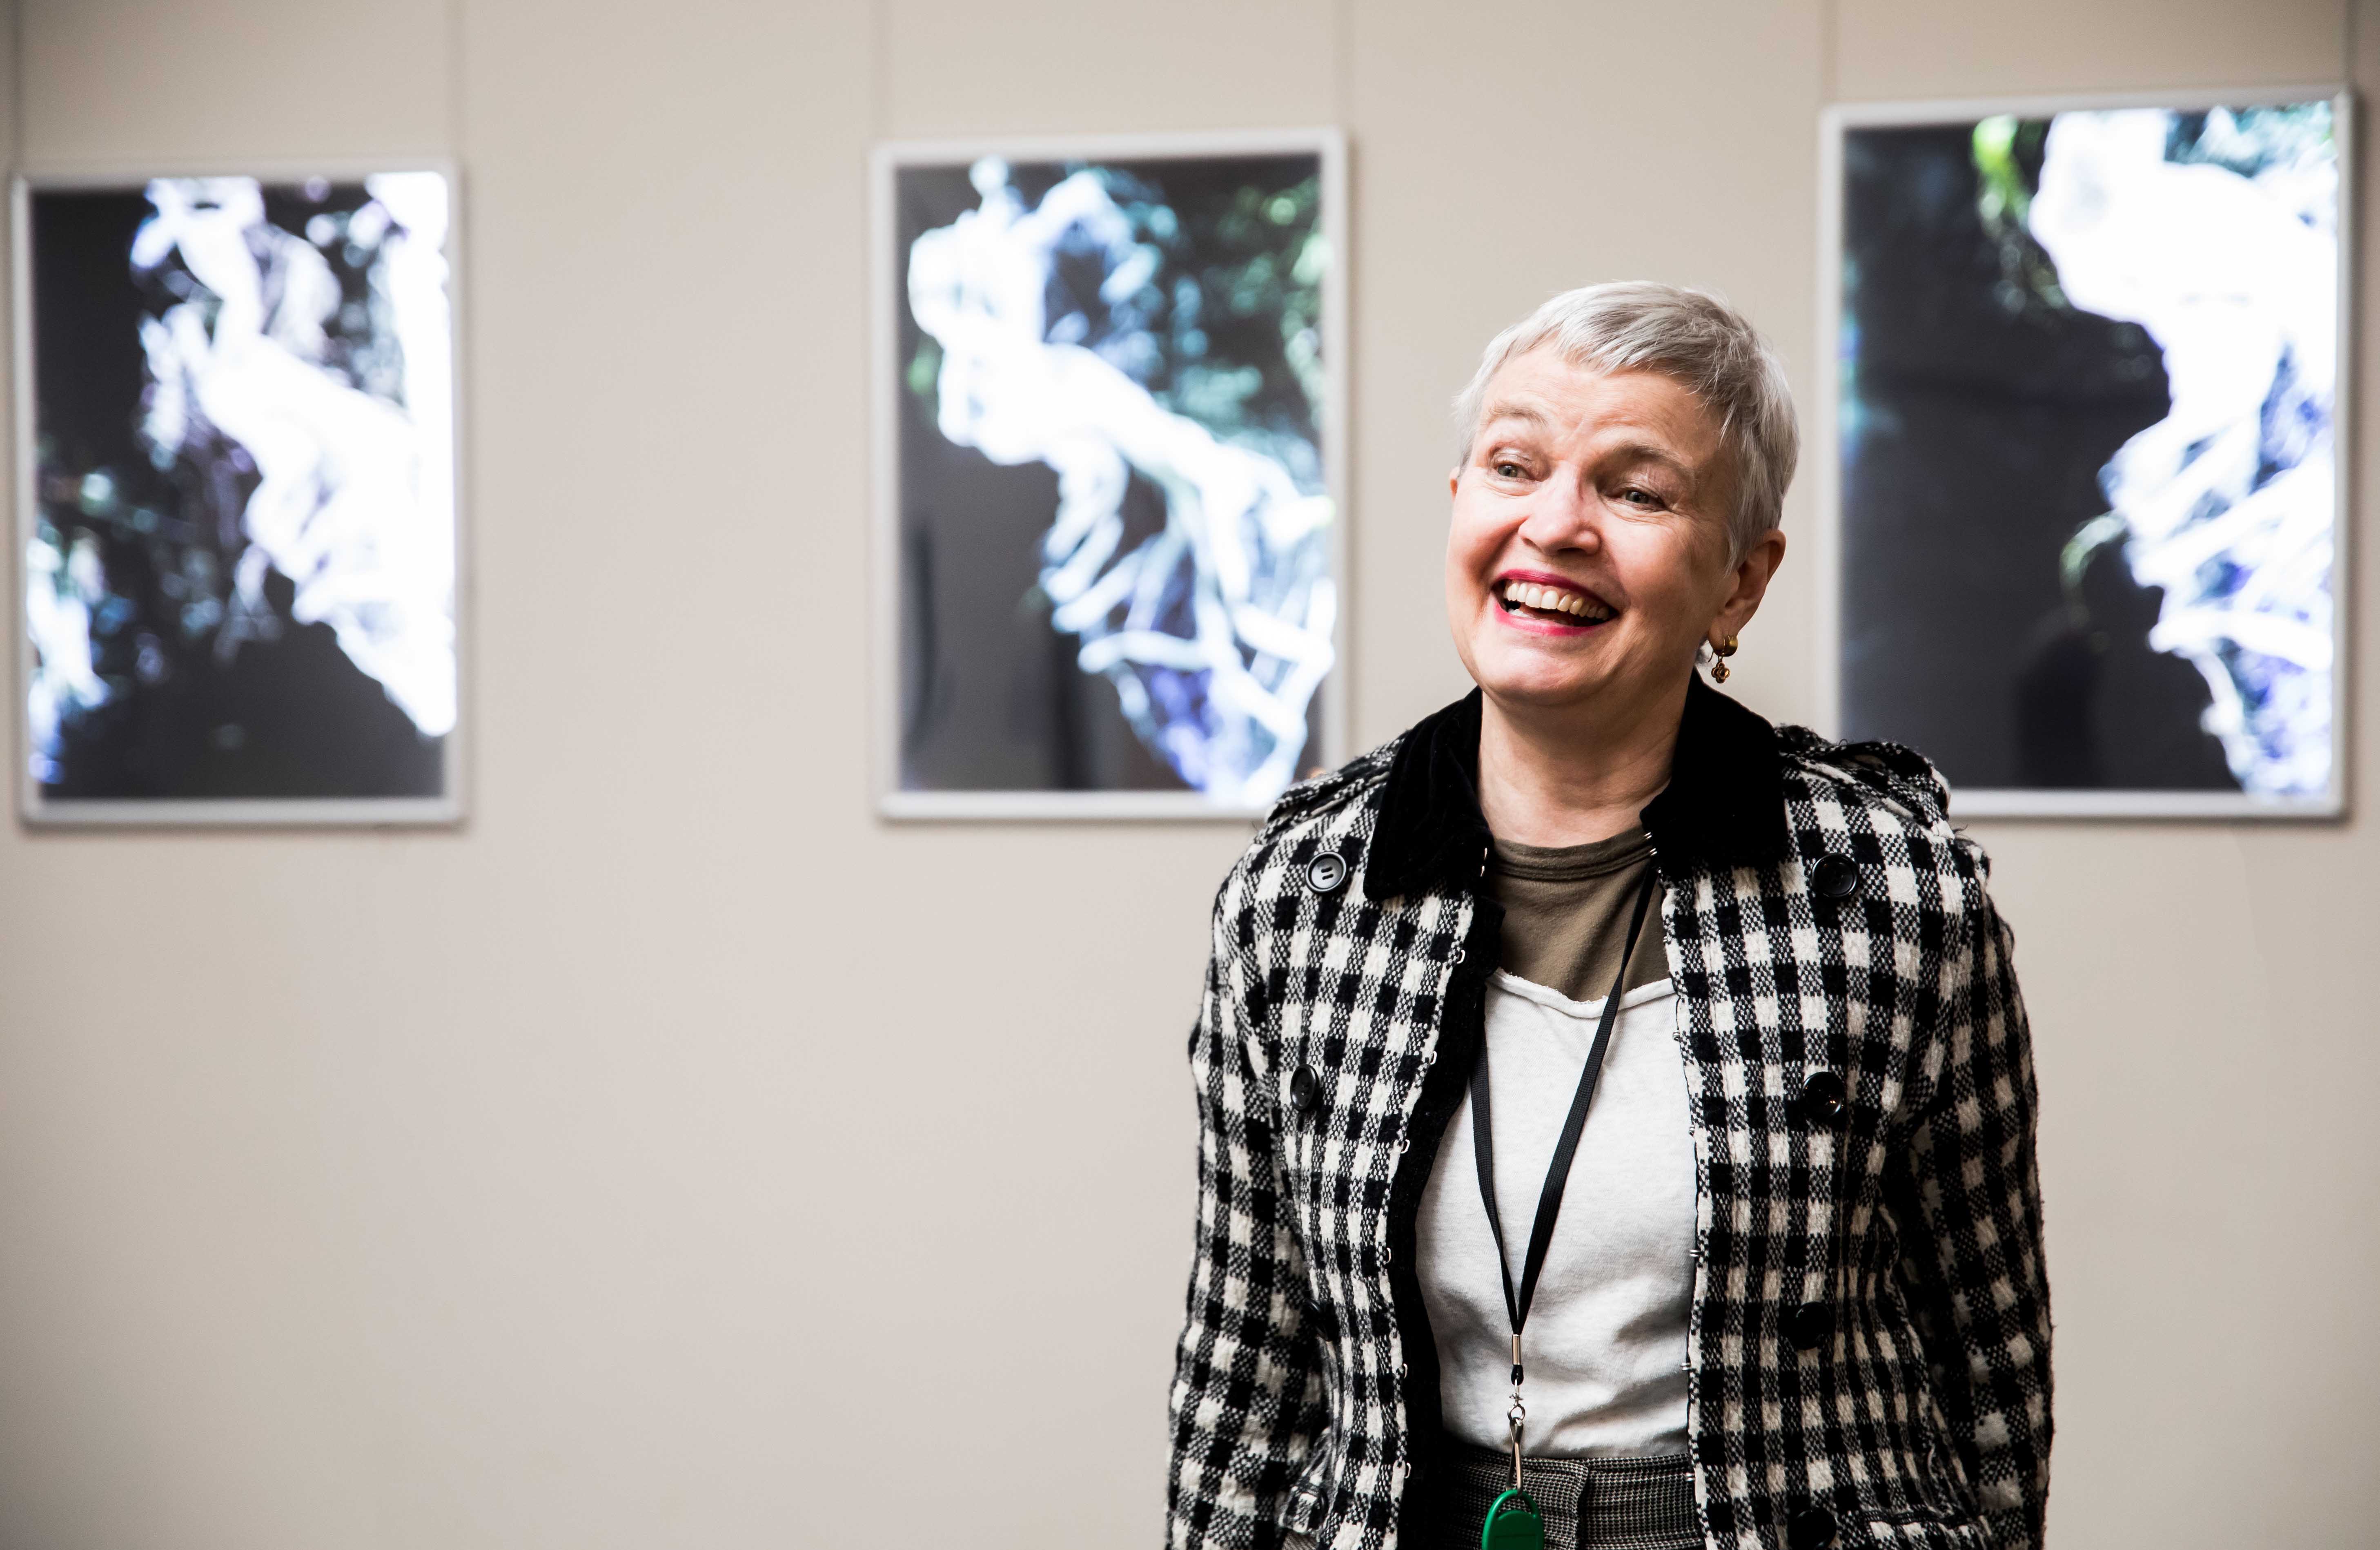 Artist, April Mountfort stands in front of three photographic works mounted on a wall. She has short white hair and smiles to someone off camera.